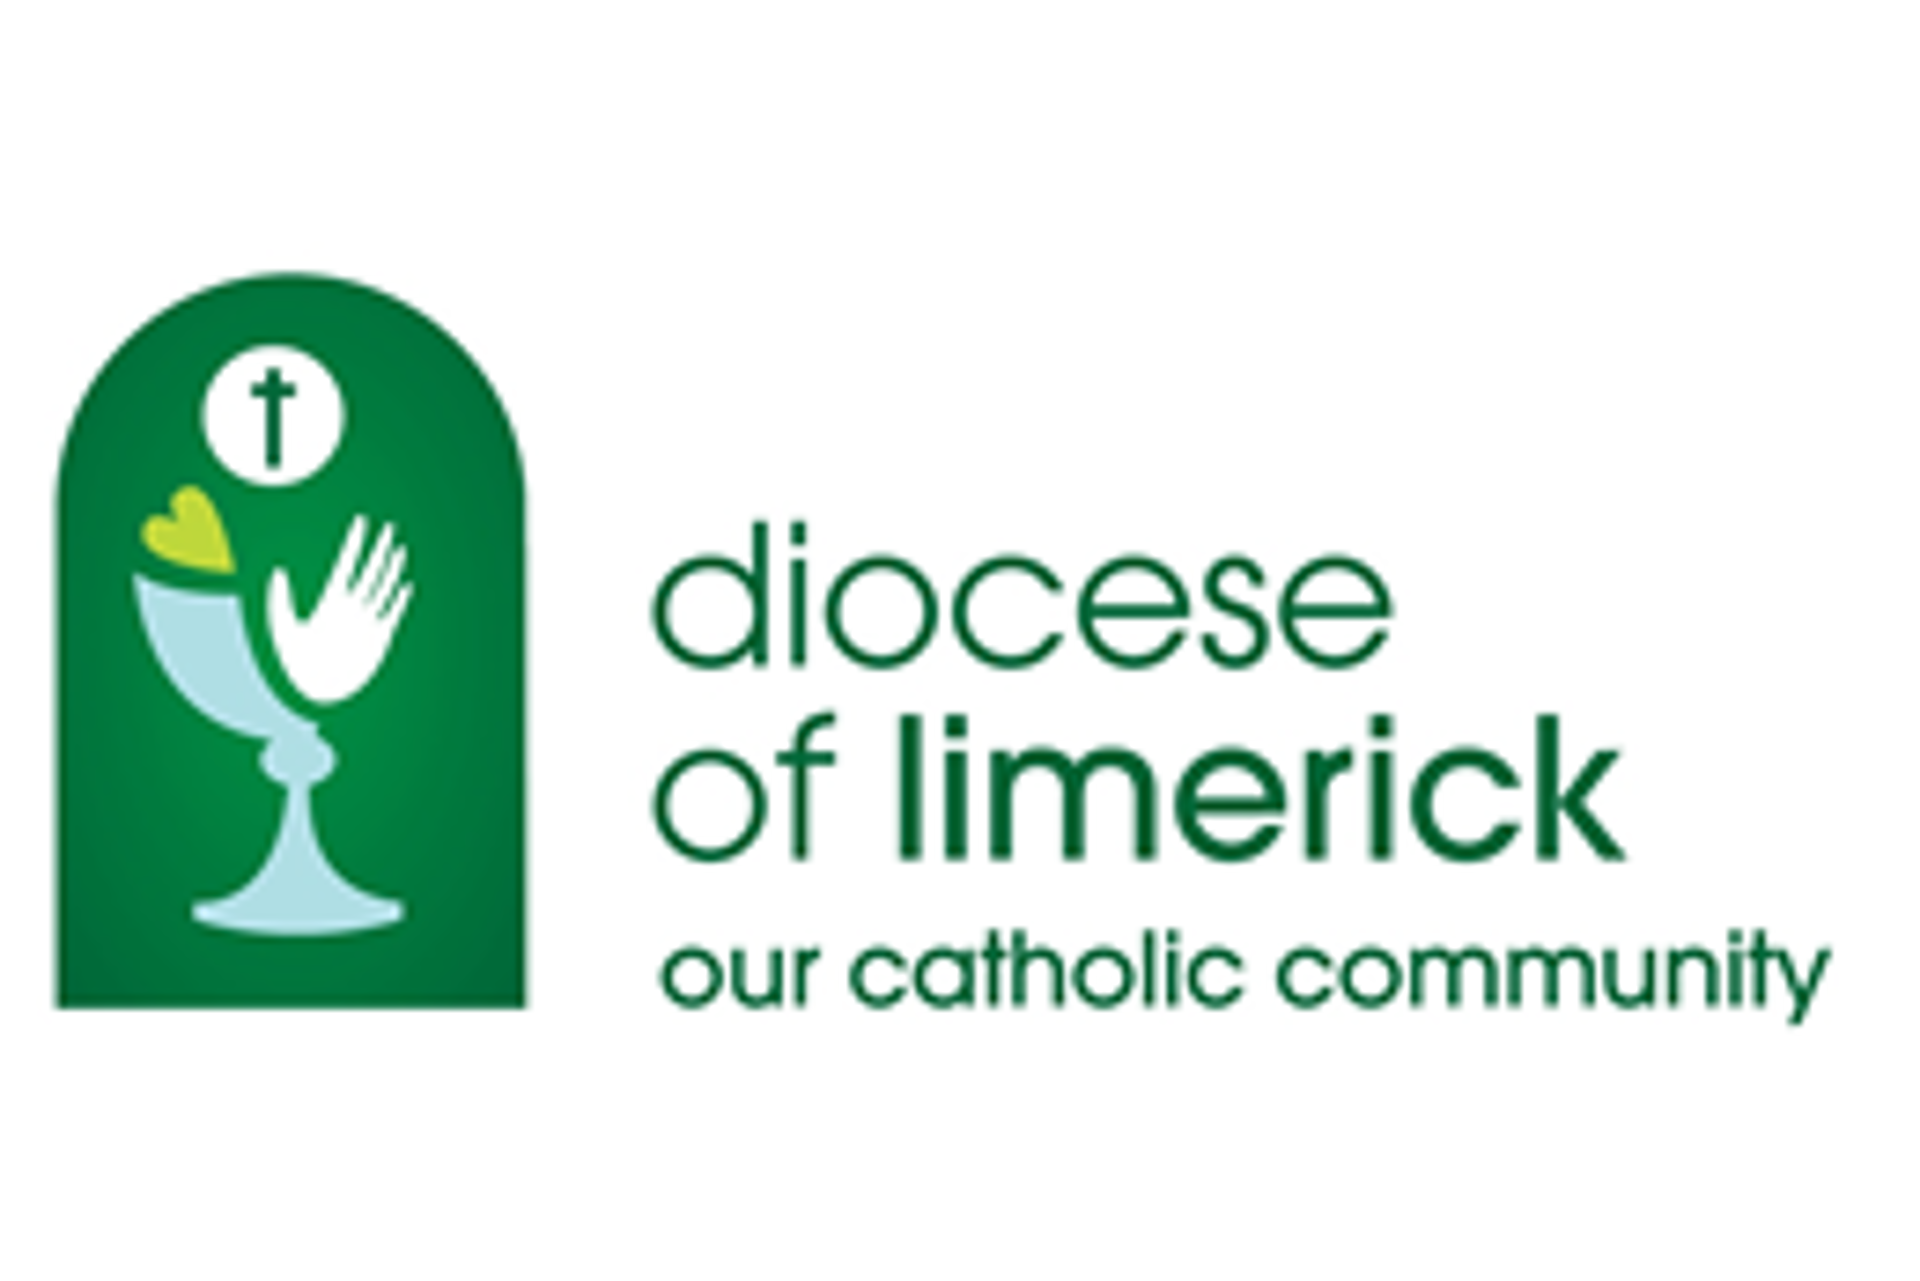 COVID shows we care about life so let's recognise that all life matters – Bishop Leahy